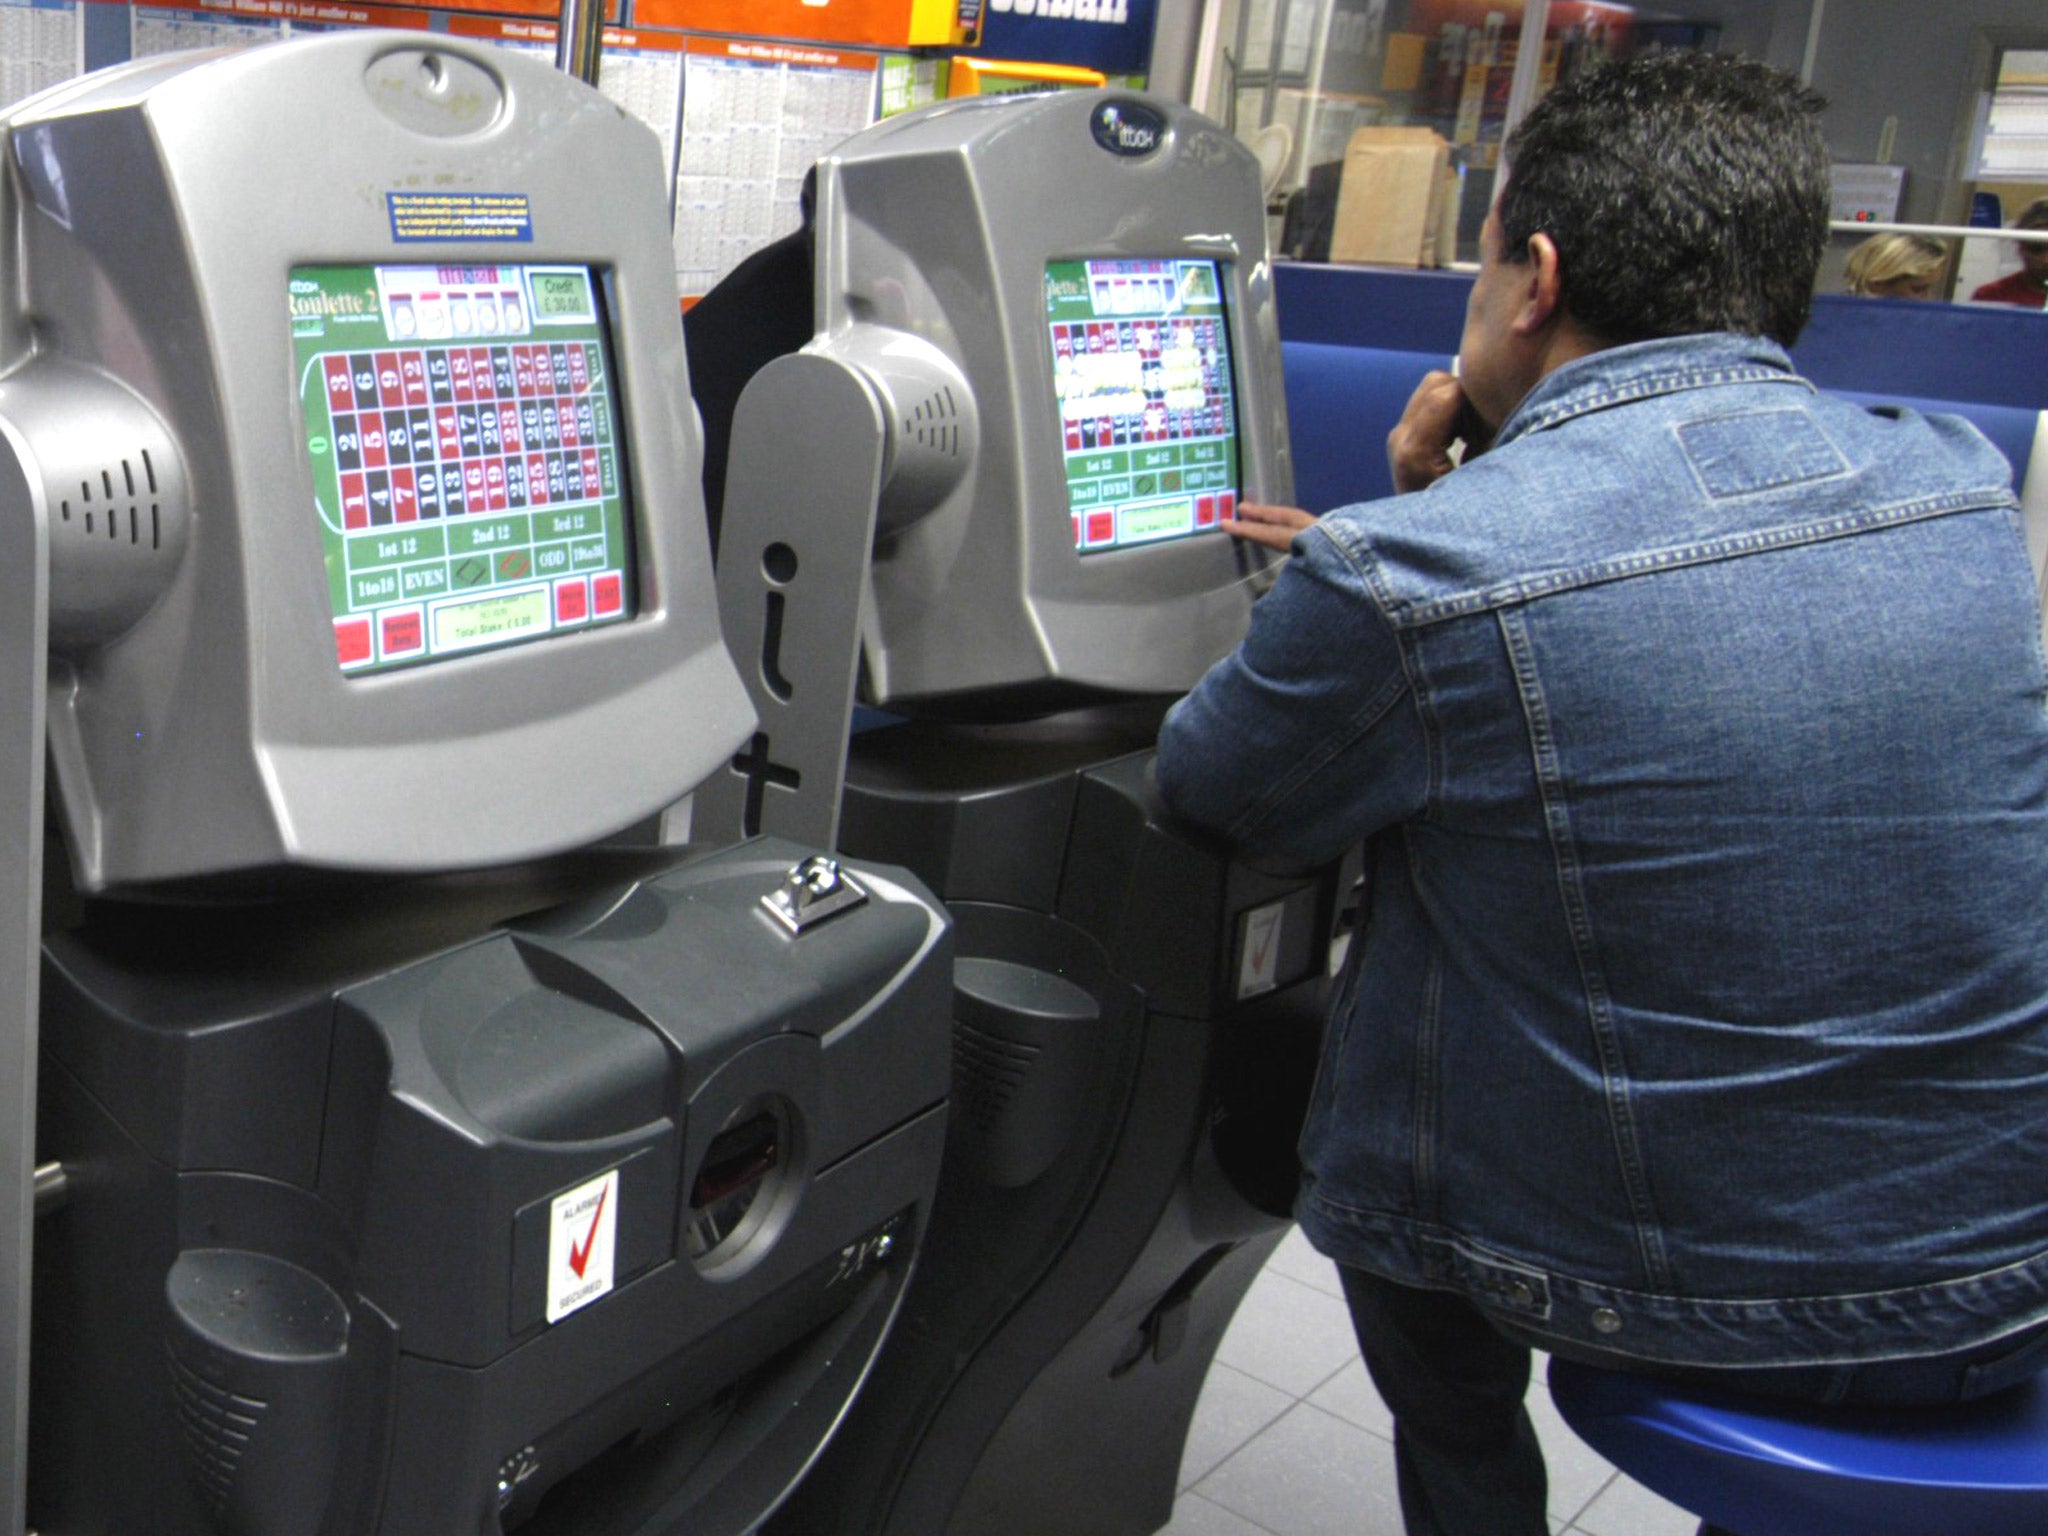 Playtech developed the software used by High Street bookmakers in their fixed-odds betting terminals